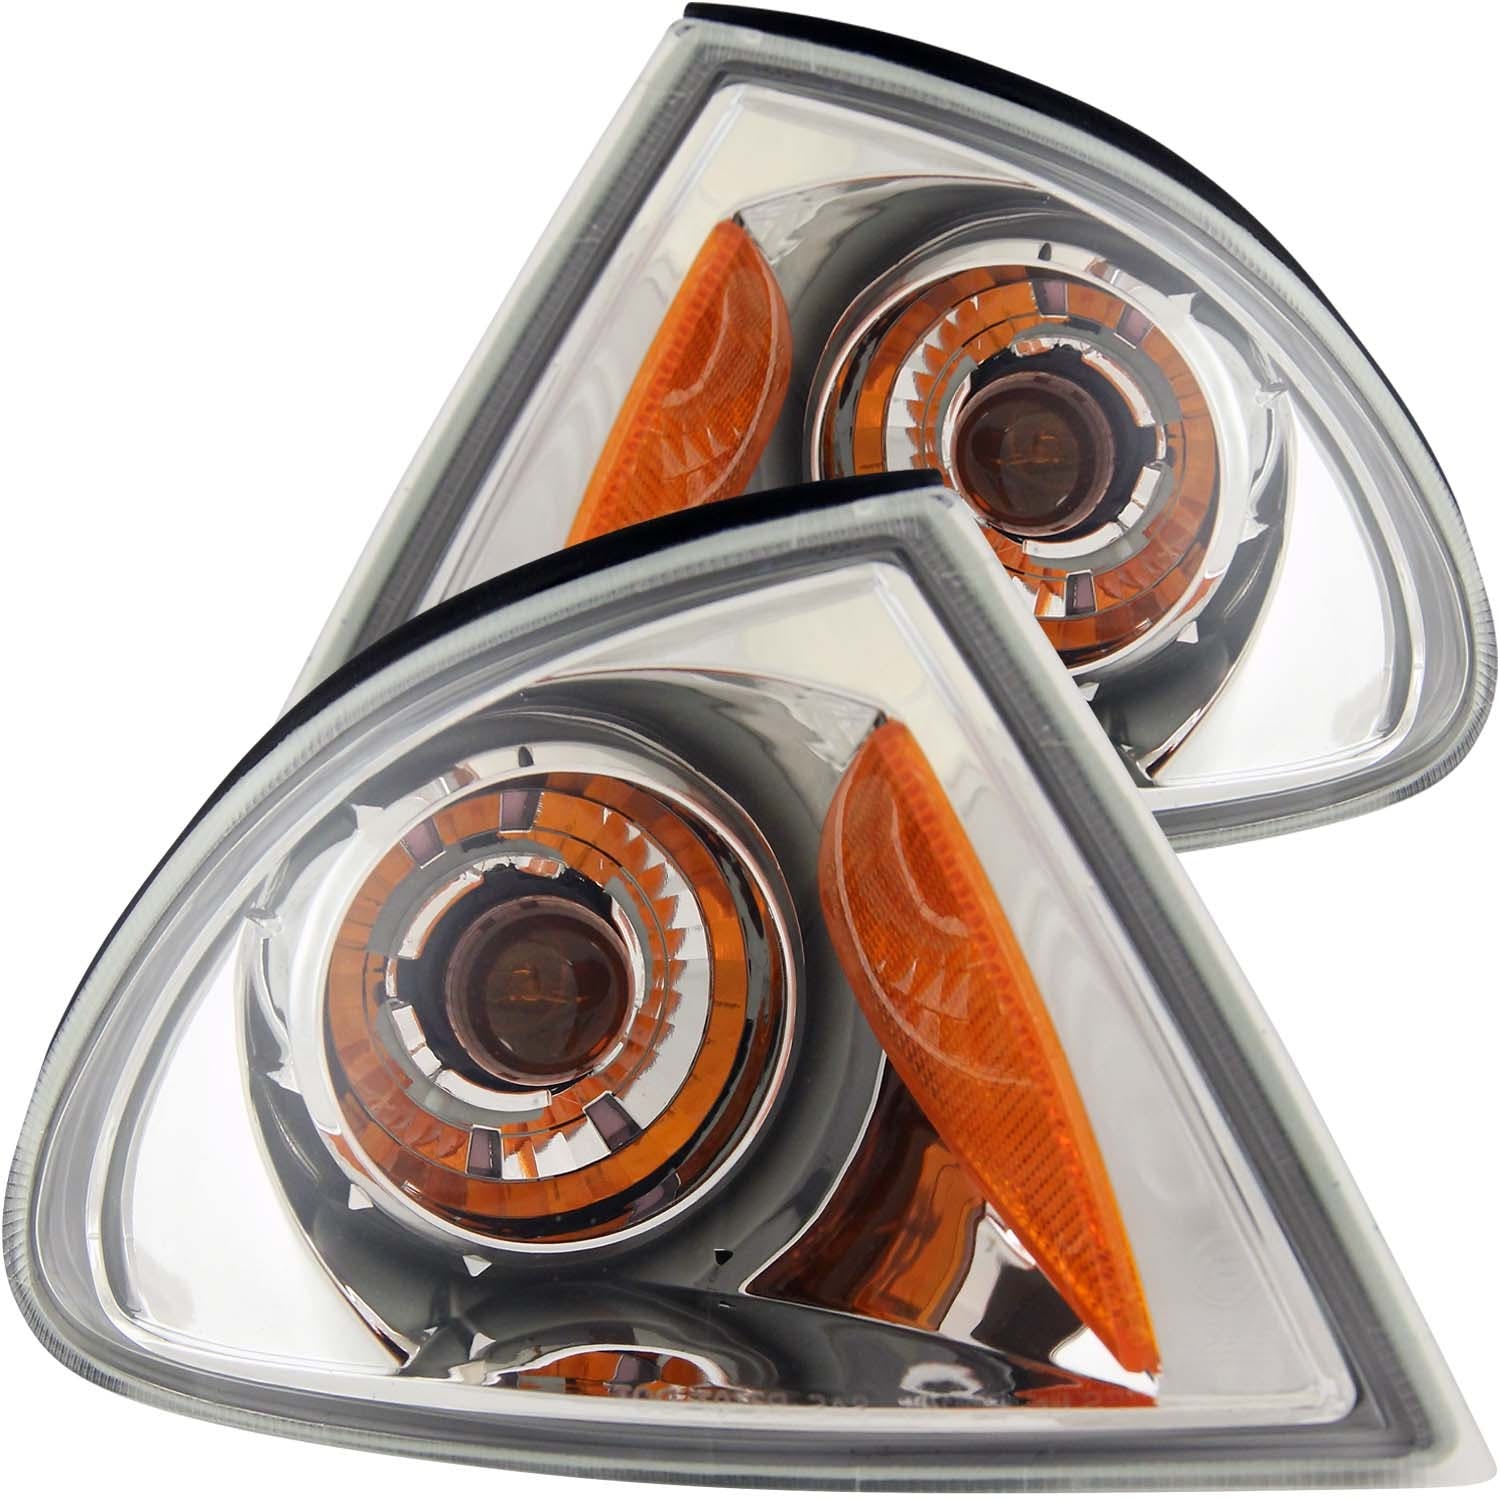 AnzoUSA 521027 Euro Corner Lights Chrome with Amber Reflector